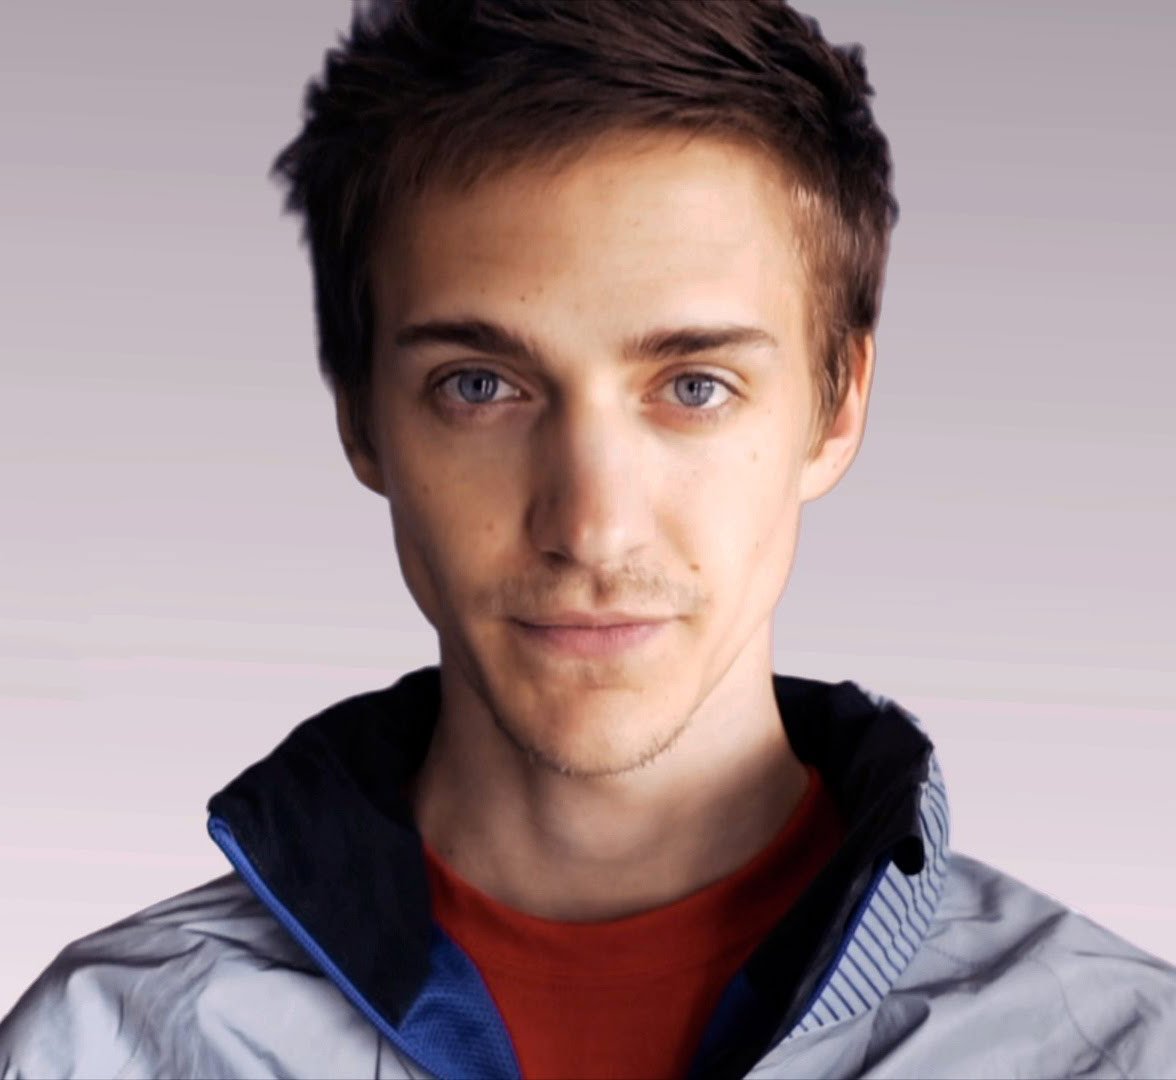 The 31-year old son of father (?) and mother(?) Ninja in 2022 photo. Ninja earned a  million dollar salary - leaving the net worth at  million in 2022